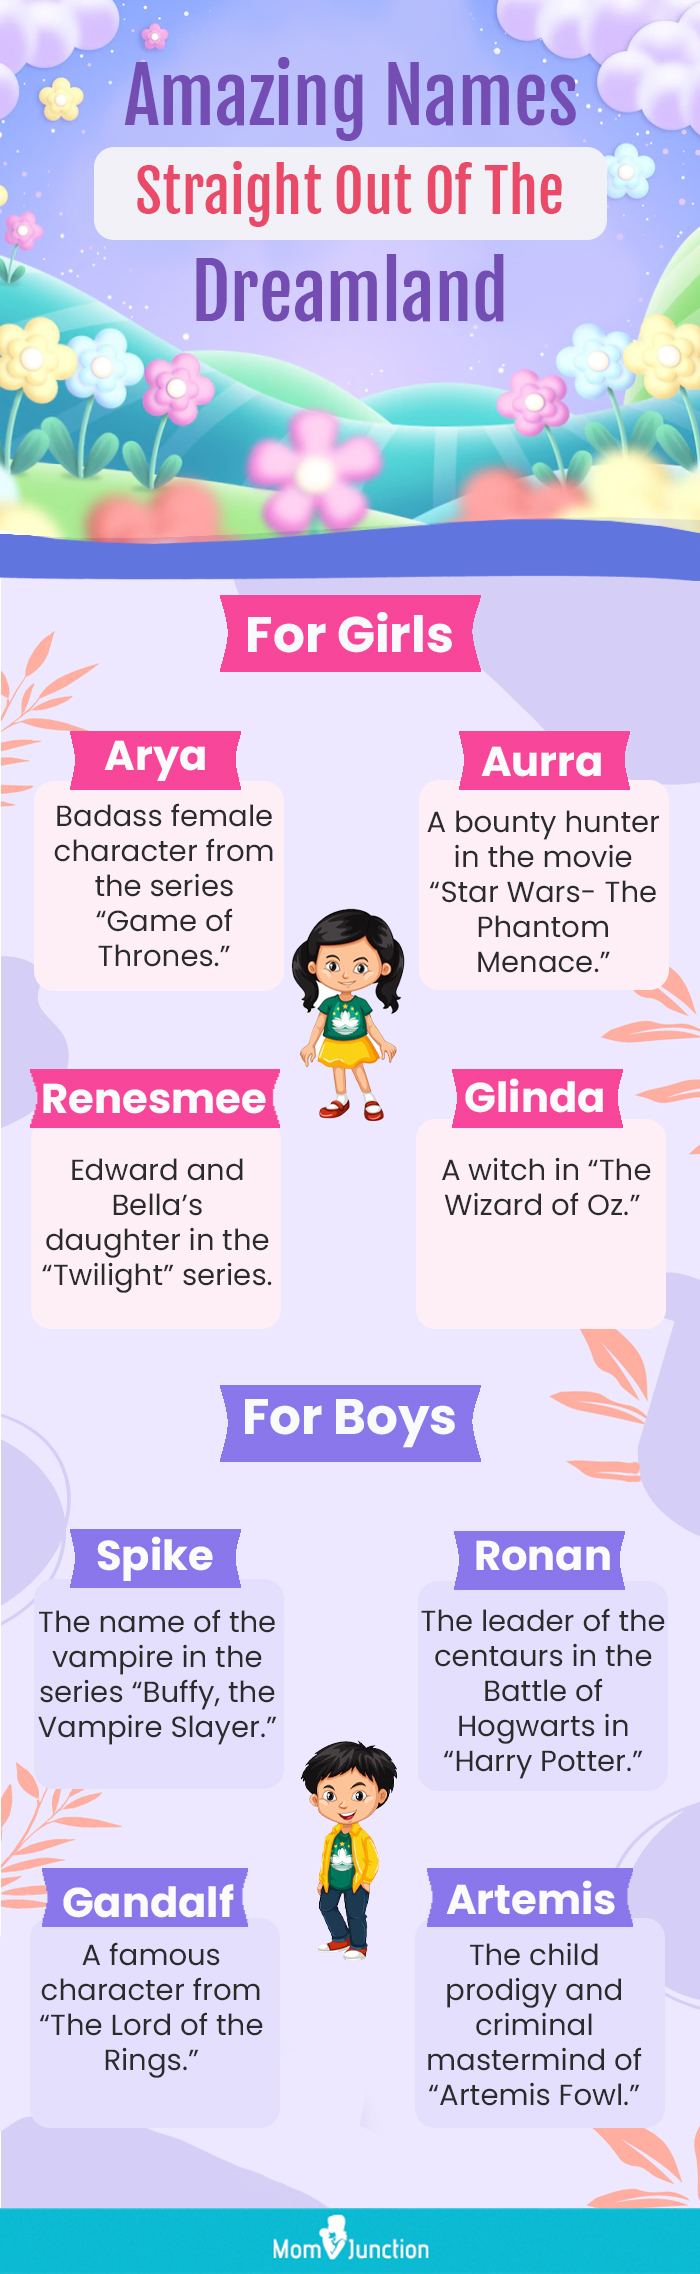 amazing names straight out of the dreamland (infographic)